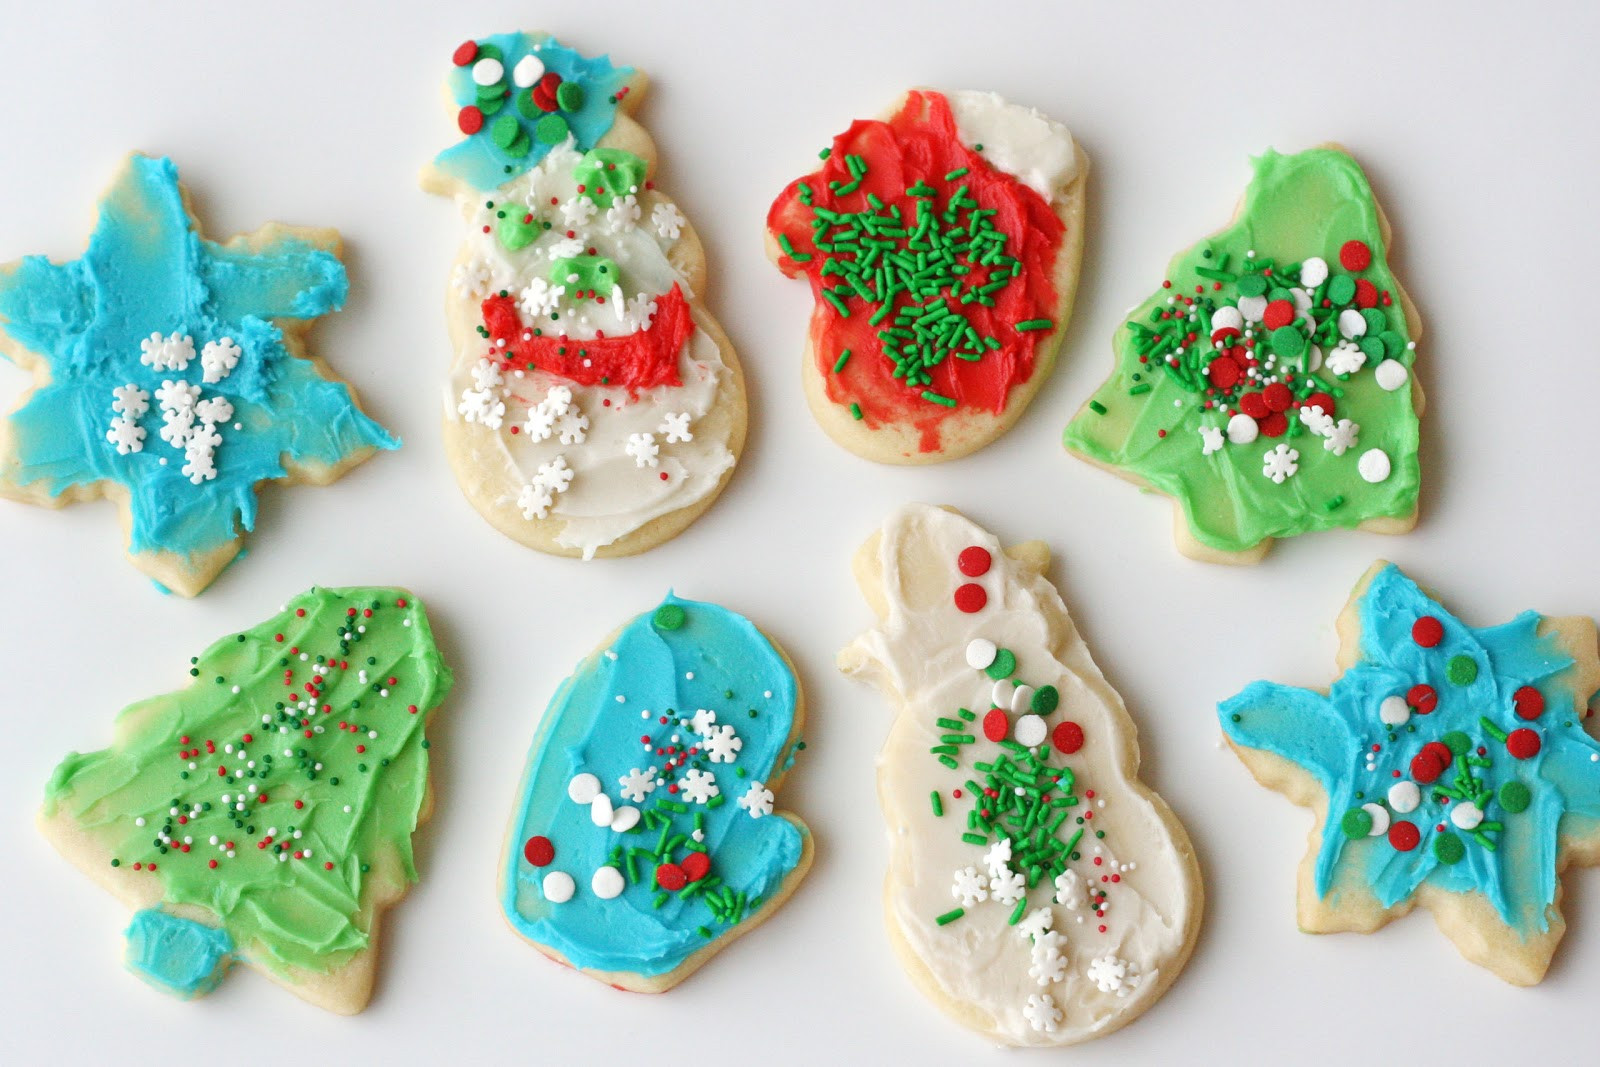 Christmas Sugar Cookies Decorating Ideas
 Cookie Decorating Kits for Kids and Easy Butter Frosting